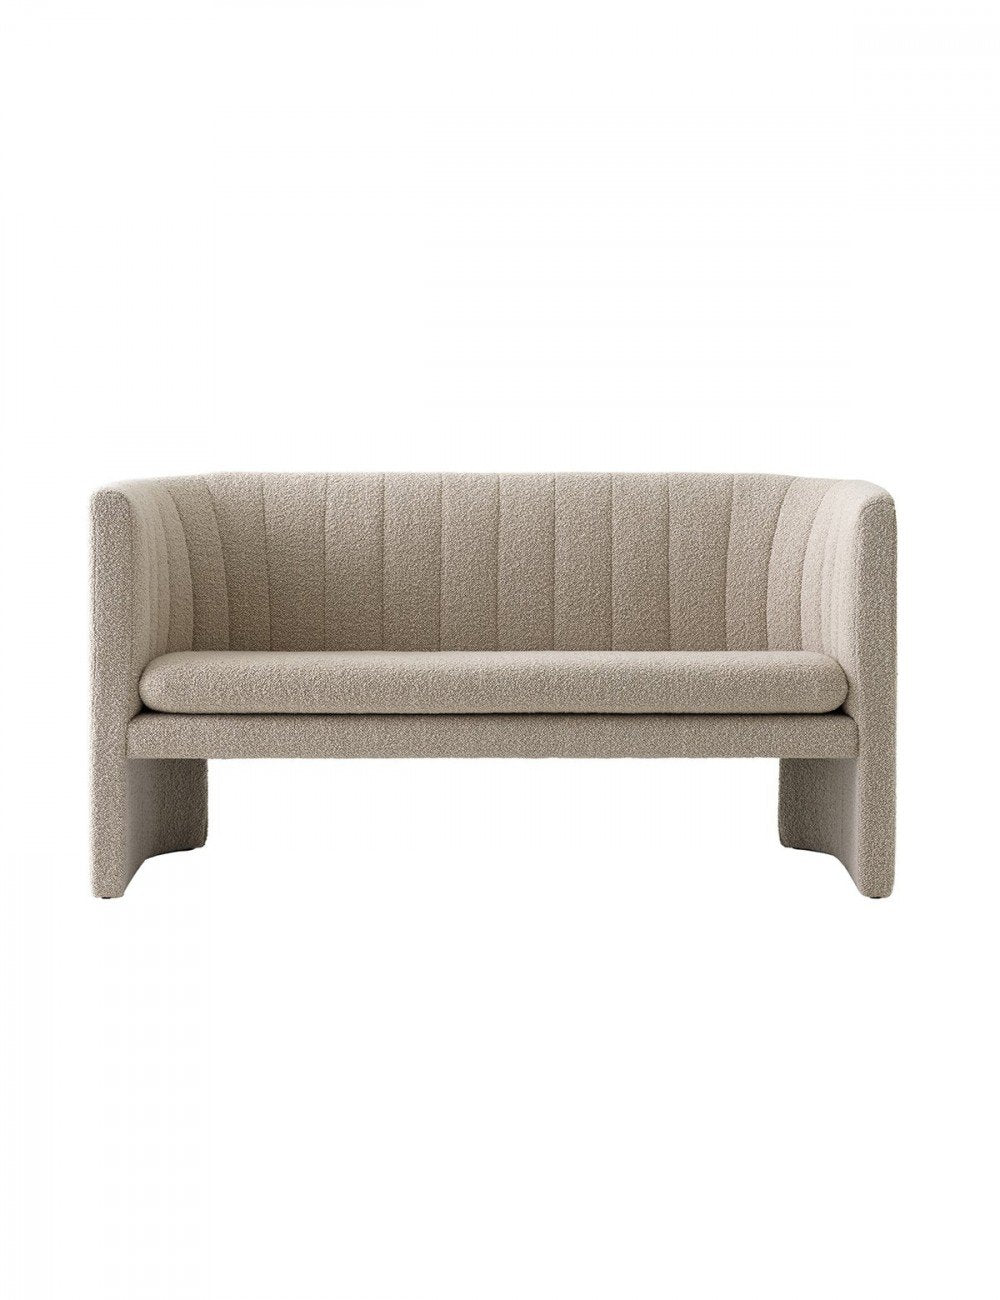 Modern Classica Luxury Leuther Setional Sofa For Office Use